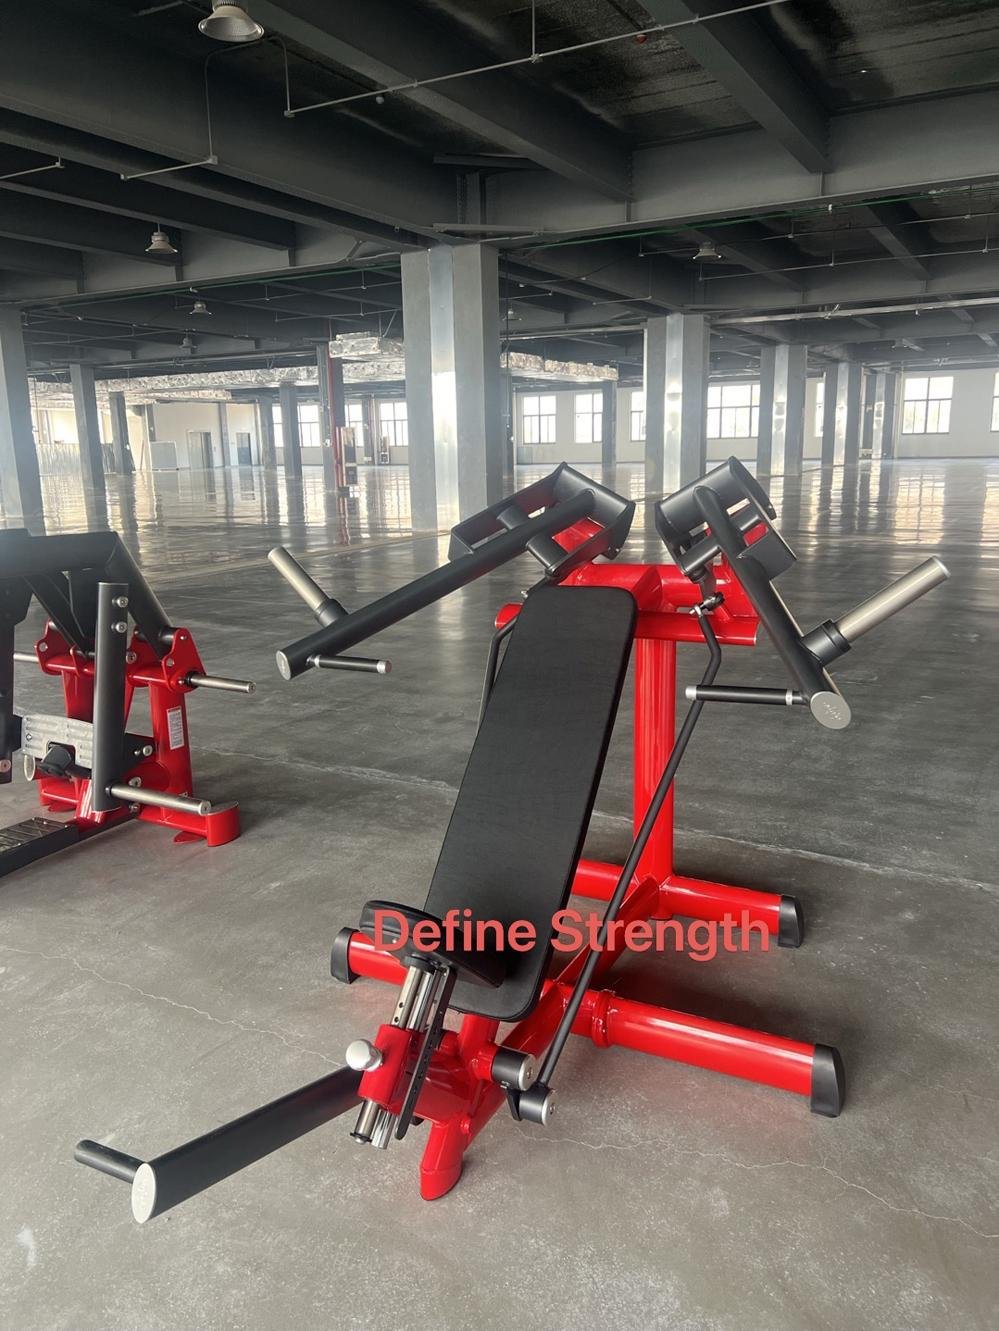  fitness gym80 equipment,gym machine,plate loaded equipment,CHEST BUTTERFLY DUAL 3